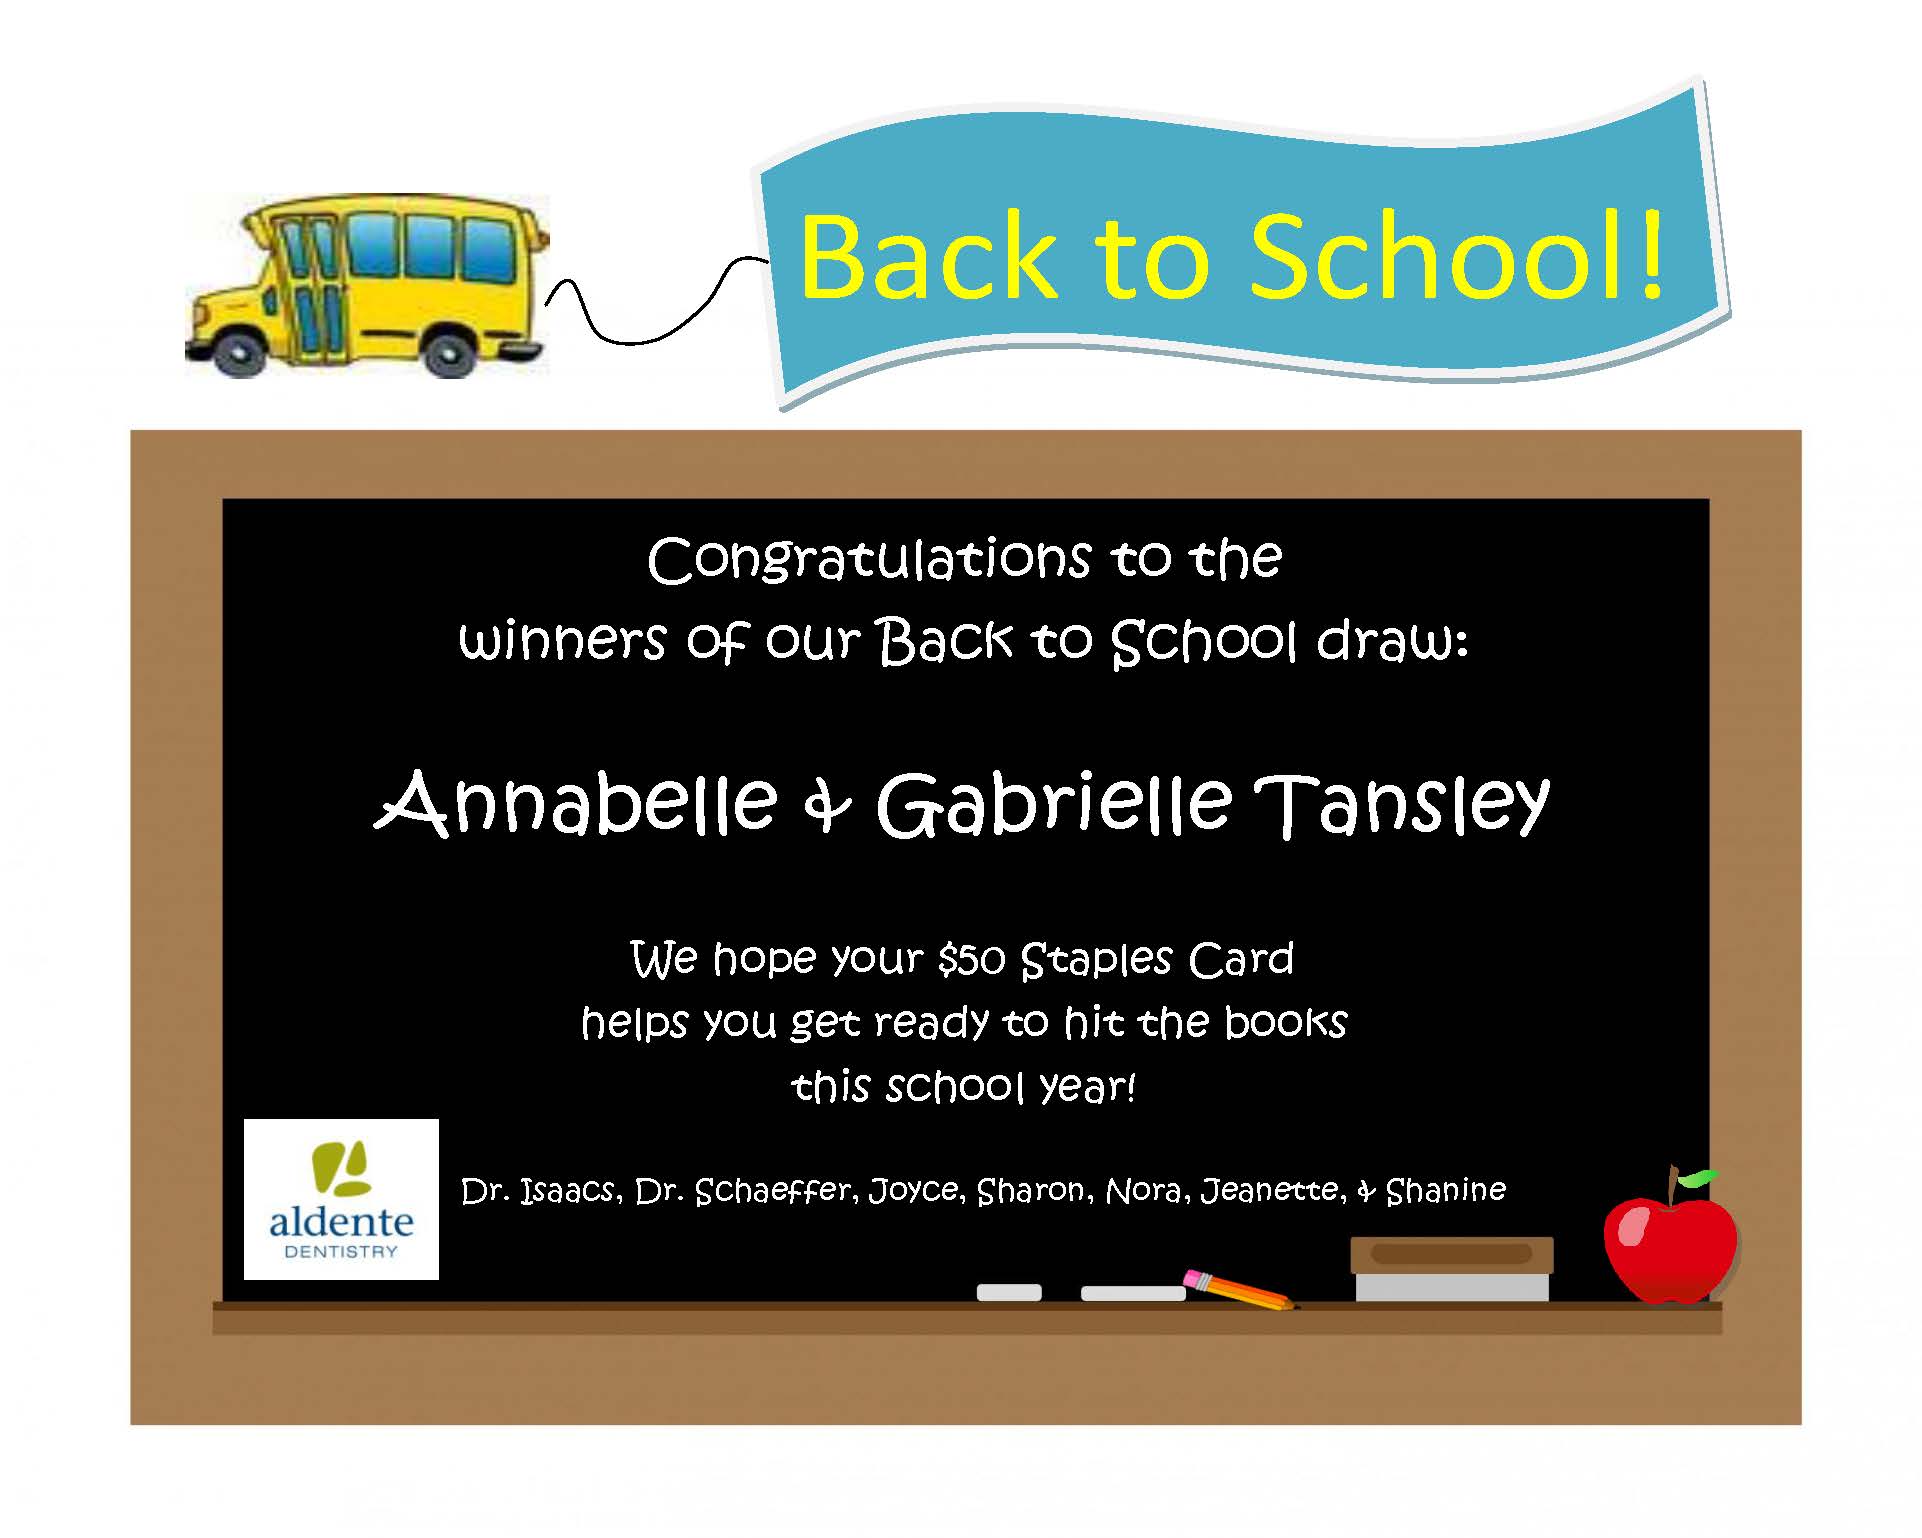 And the winner of our Back to School draw is…